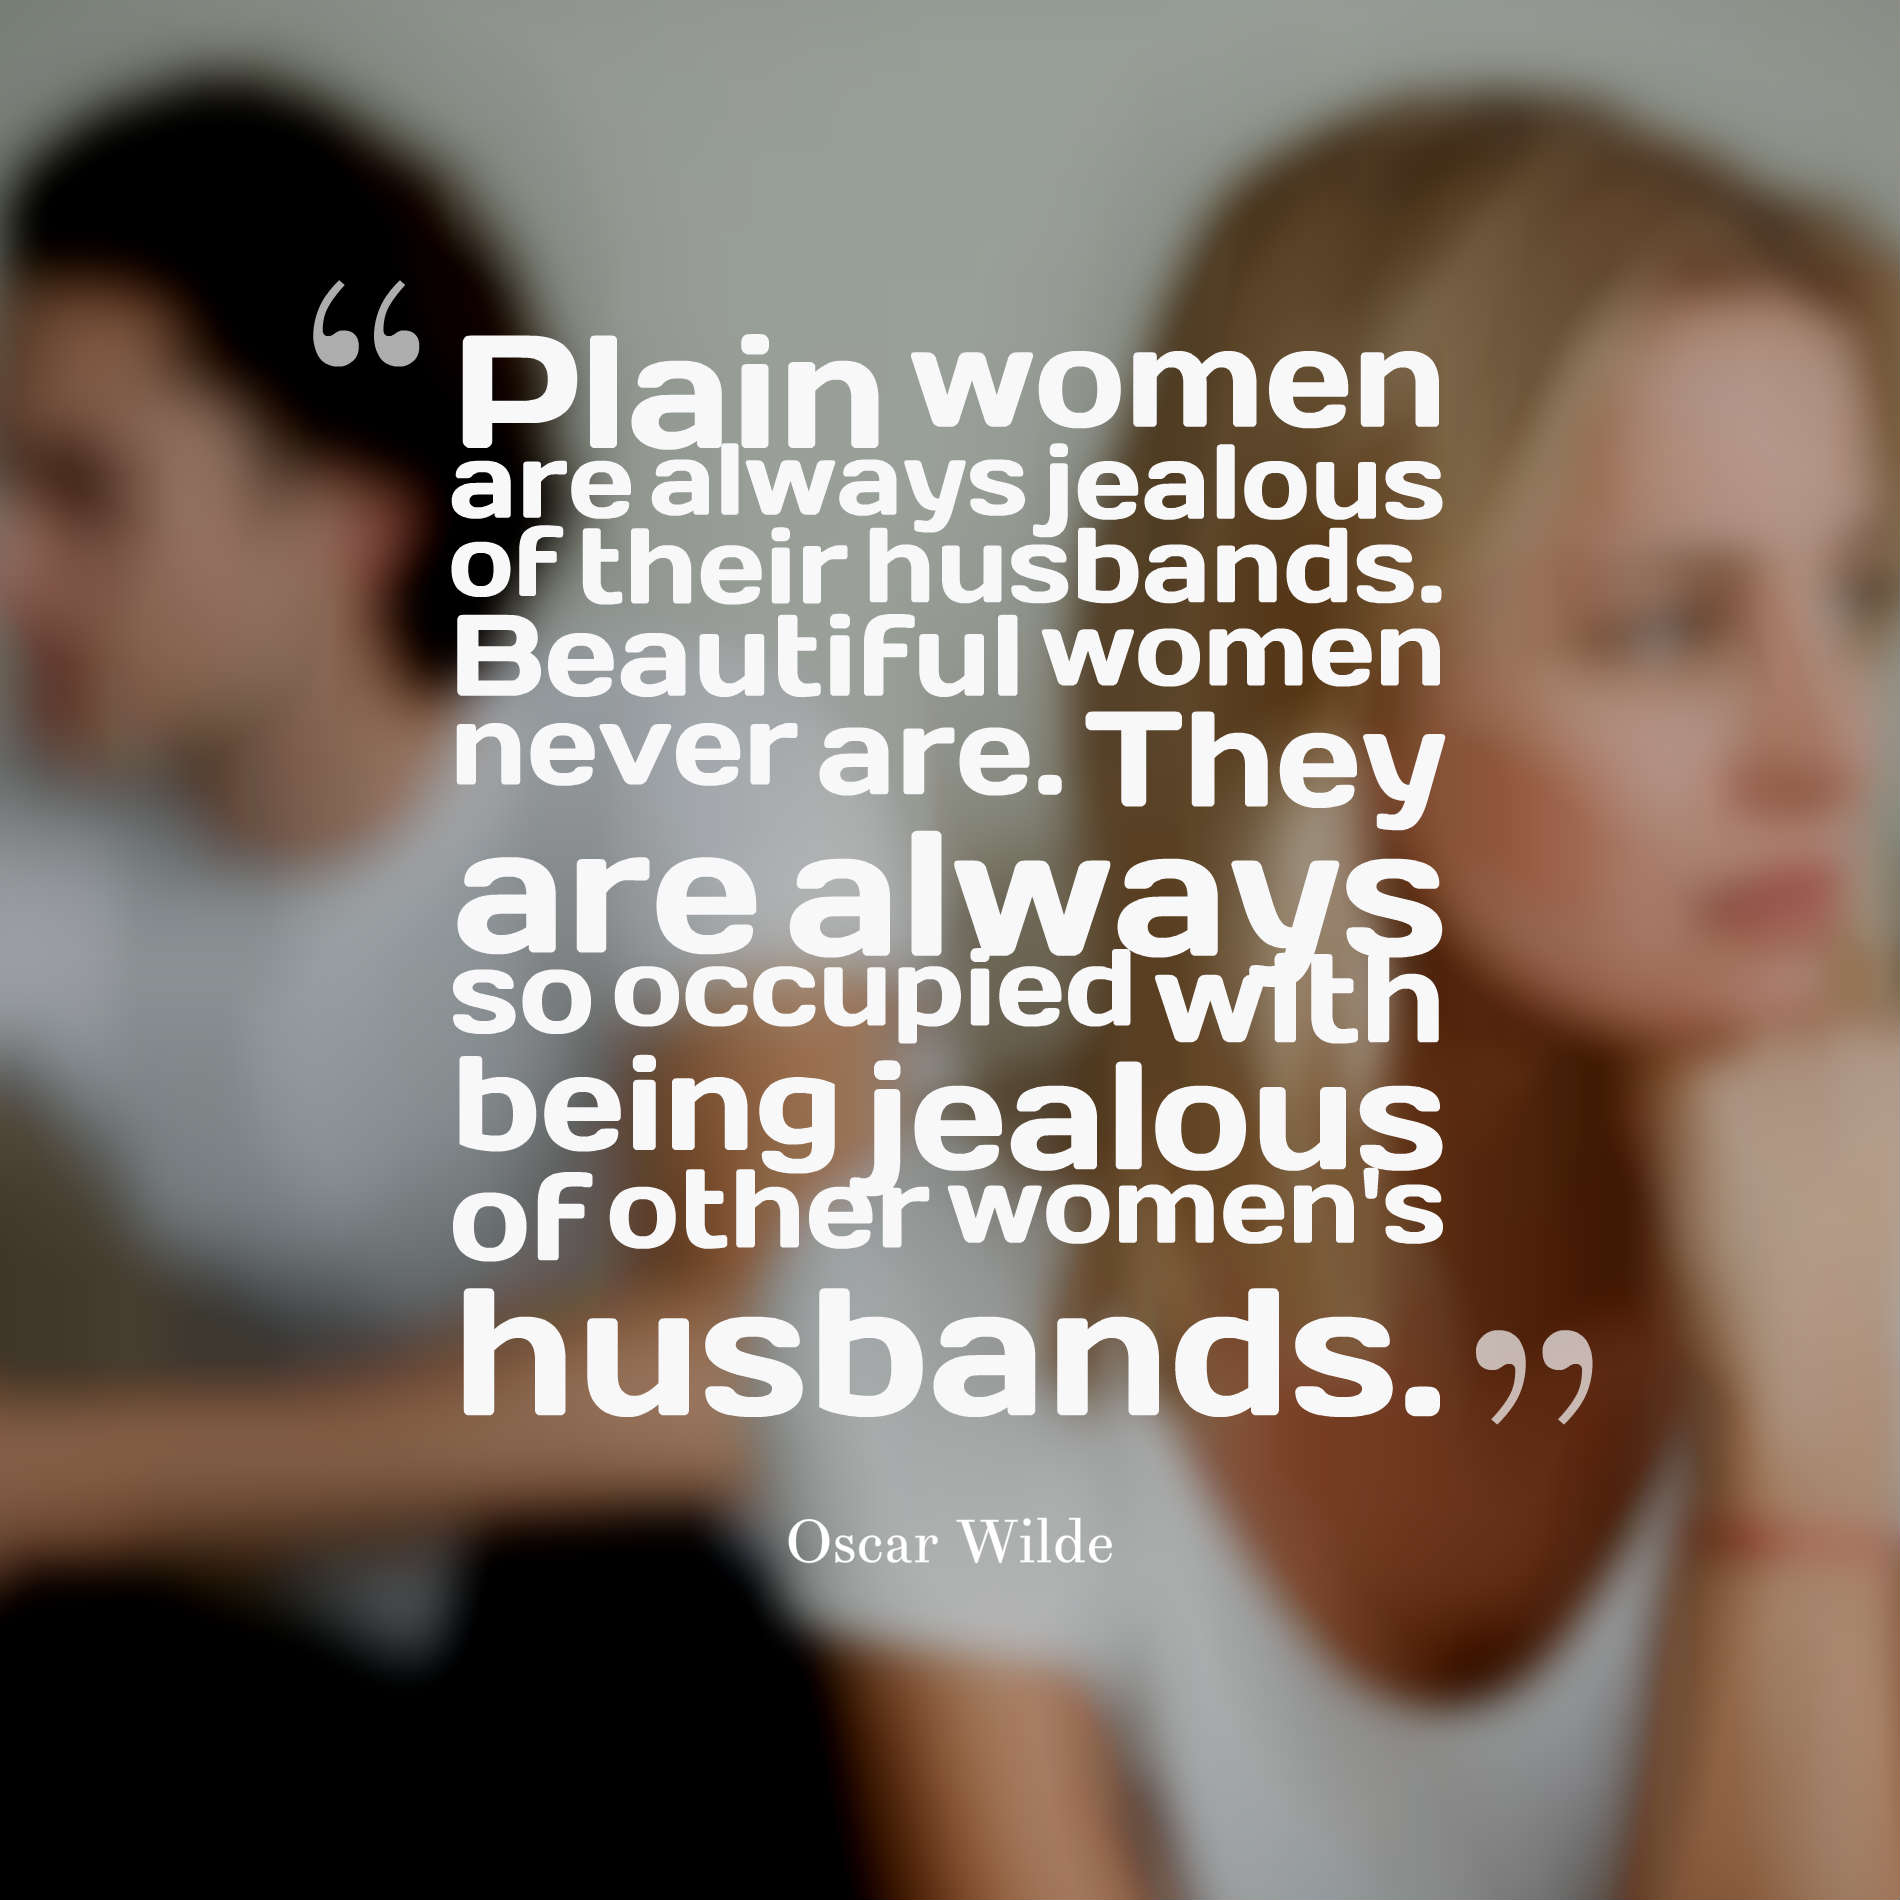 Plain women are always jealous of their husbands. Beautiful women never are. They are always so occupied with being jealous of other women's husbands.